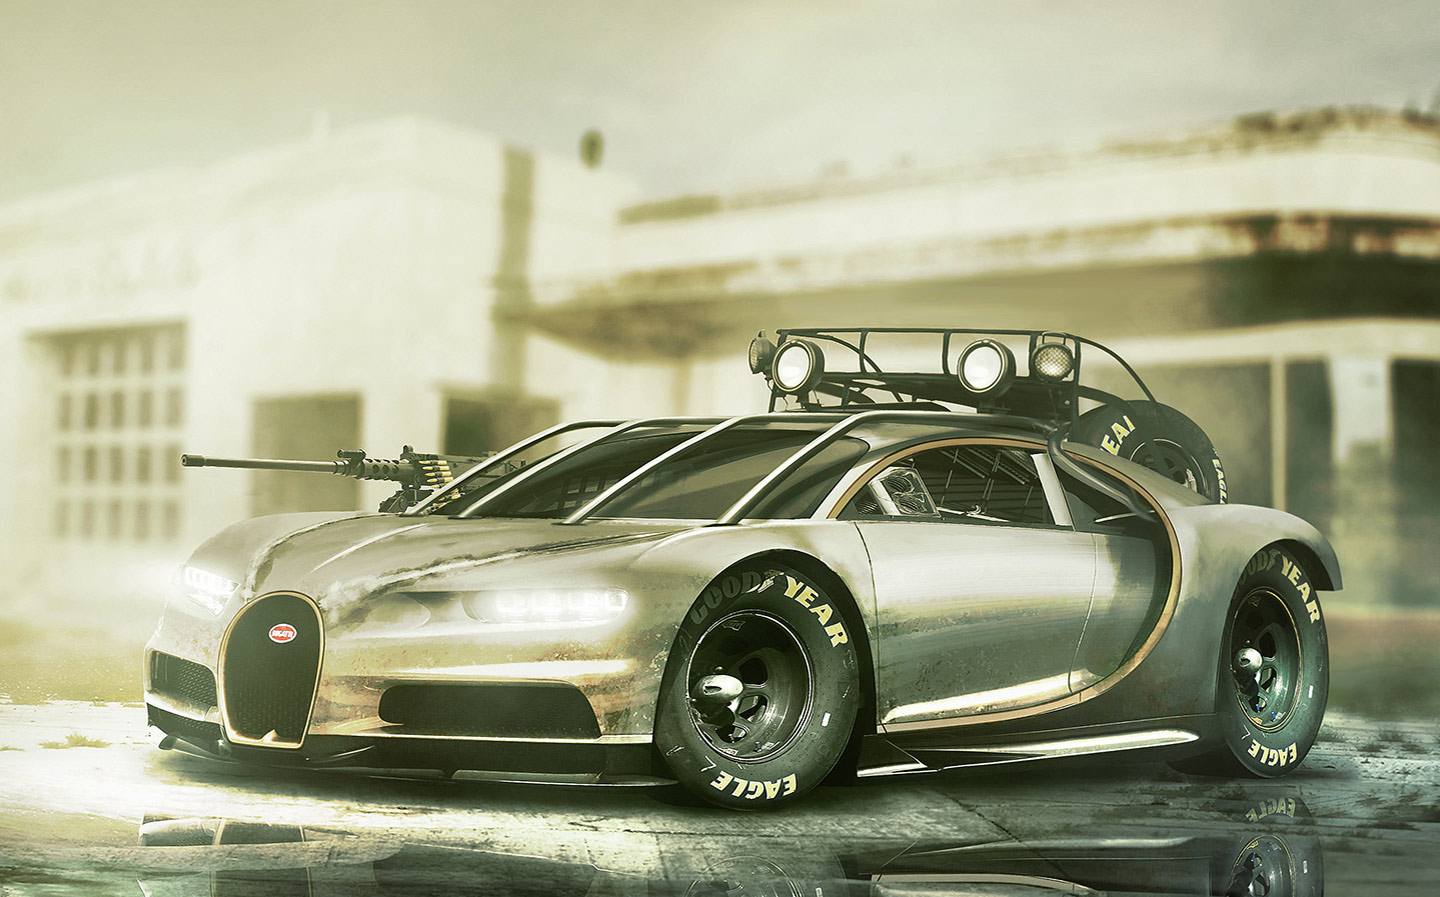 Here are seven doomsday cars to get you through the impending apocalypse